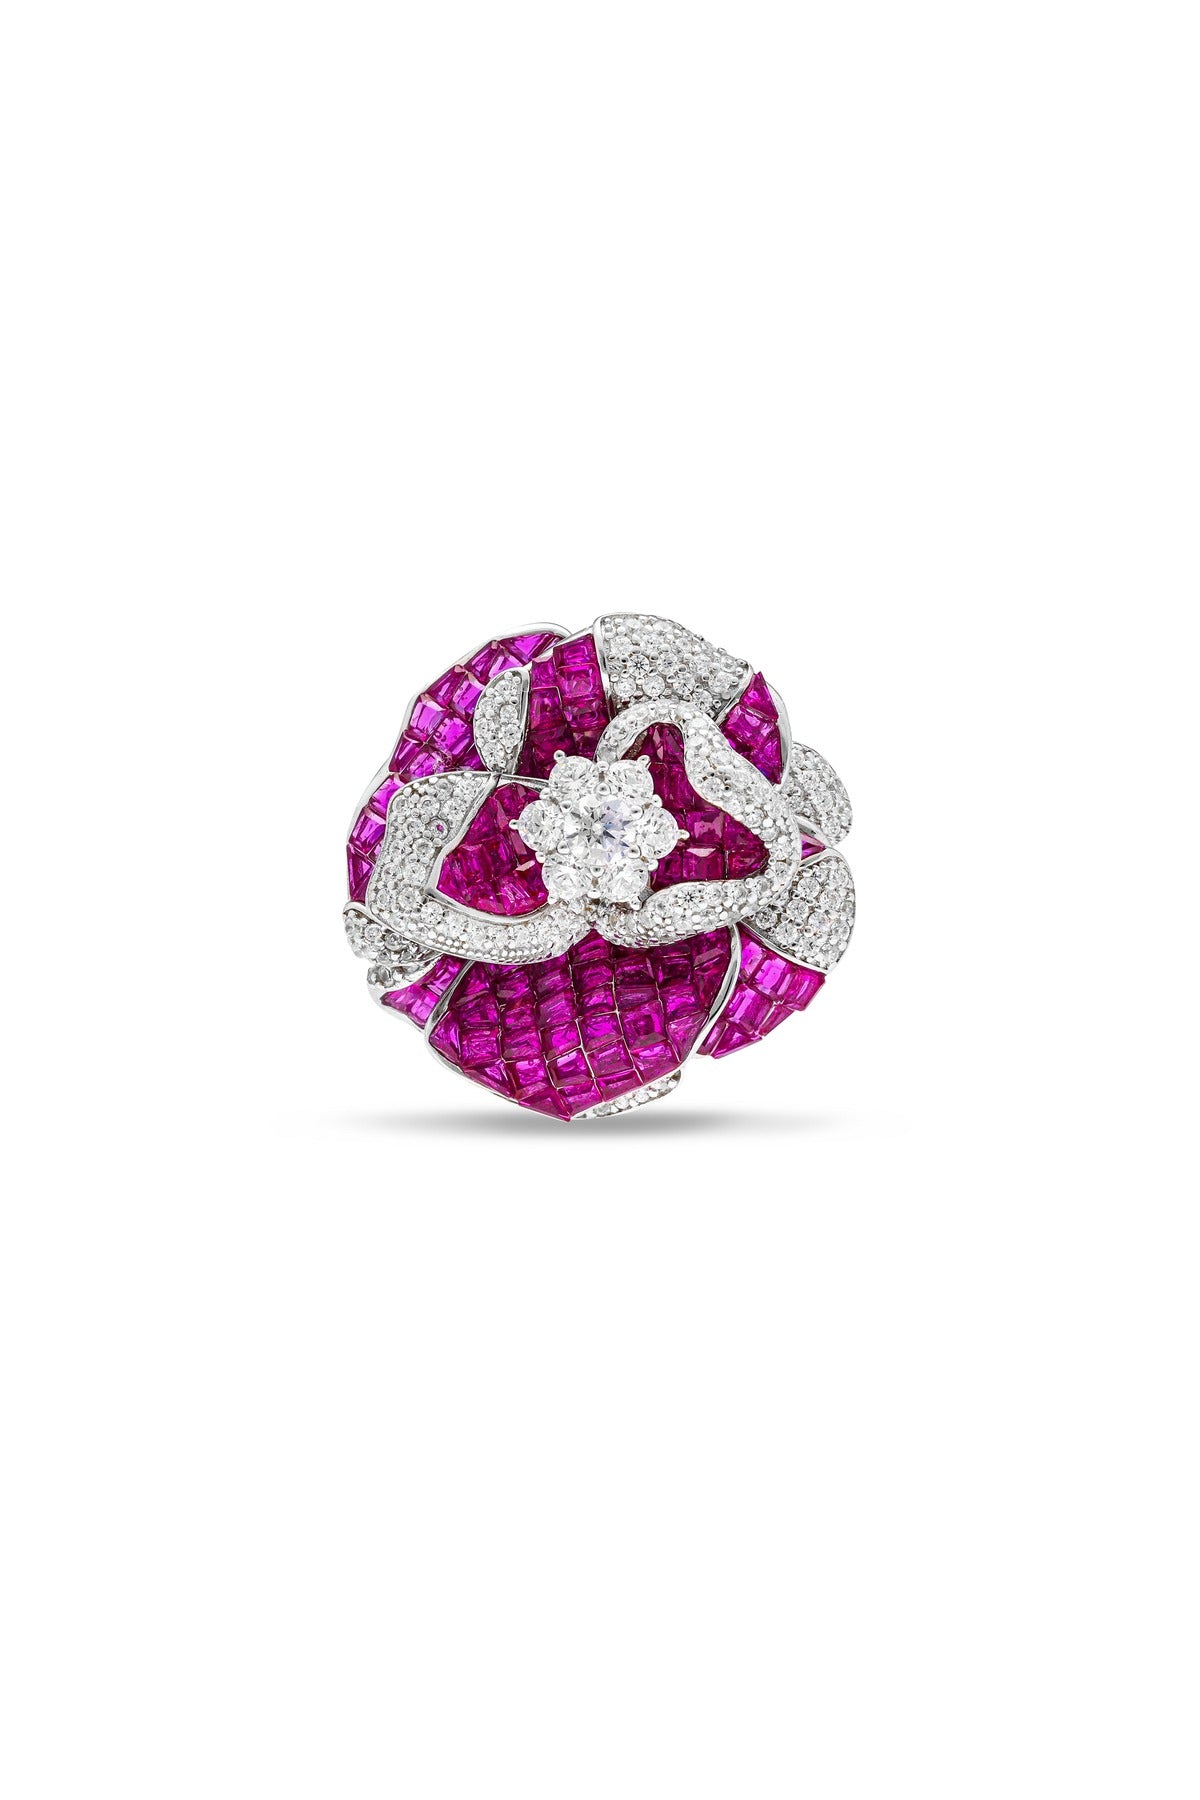 Wildflower Ruby Whispers Statement Ring